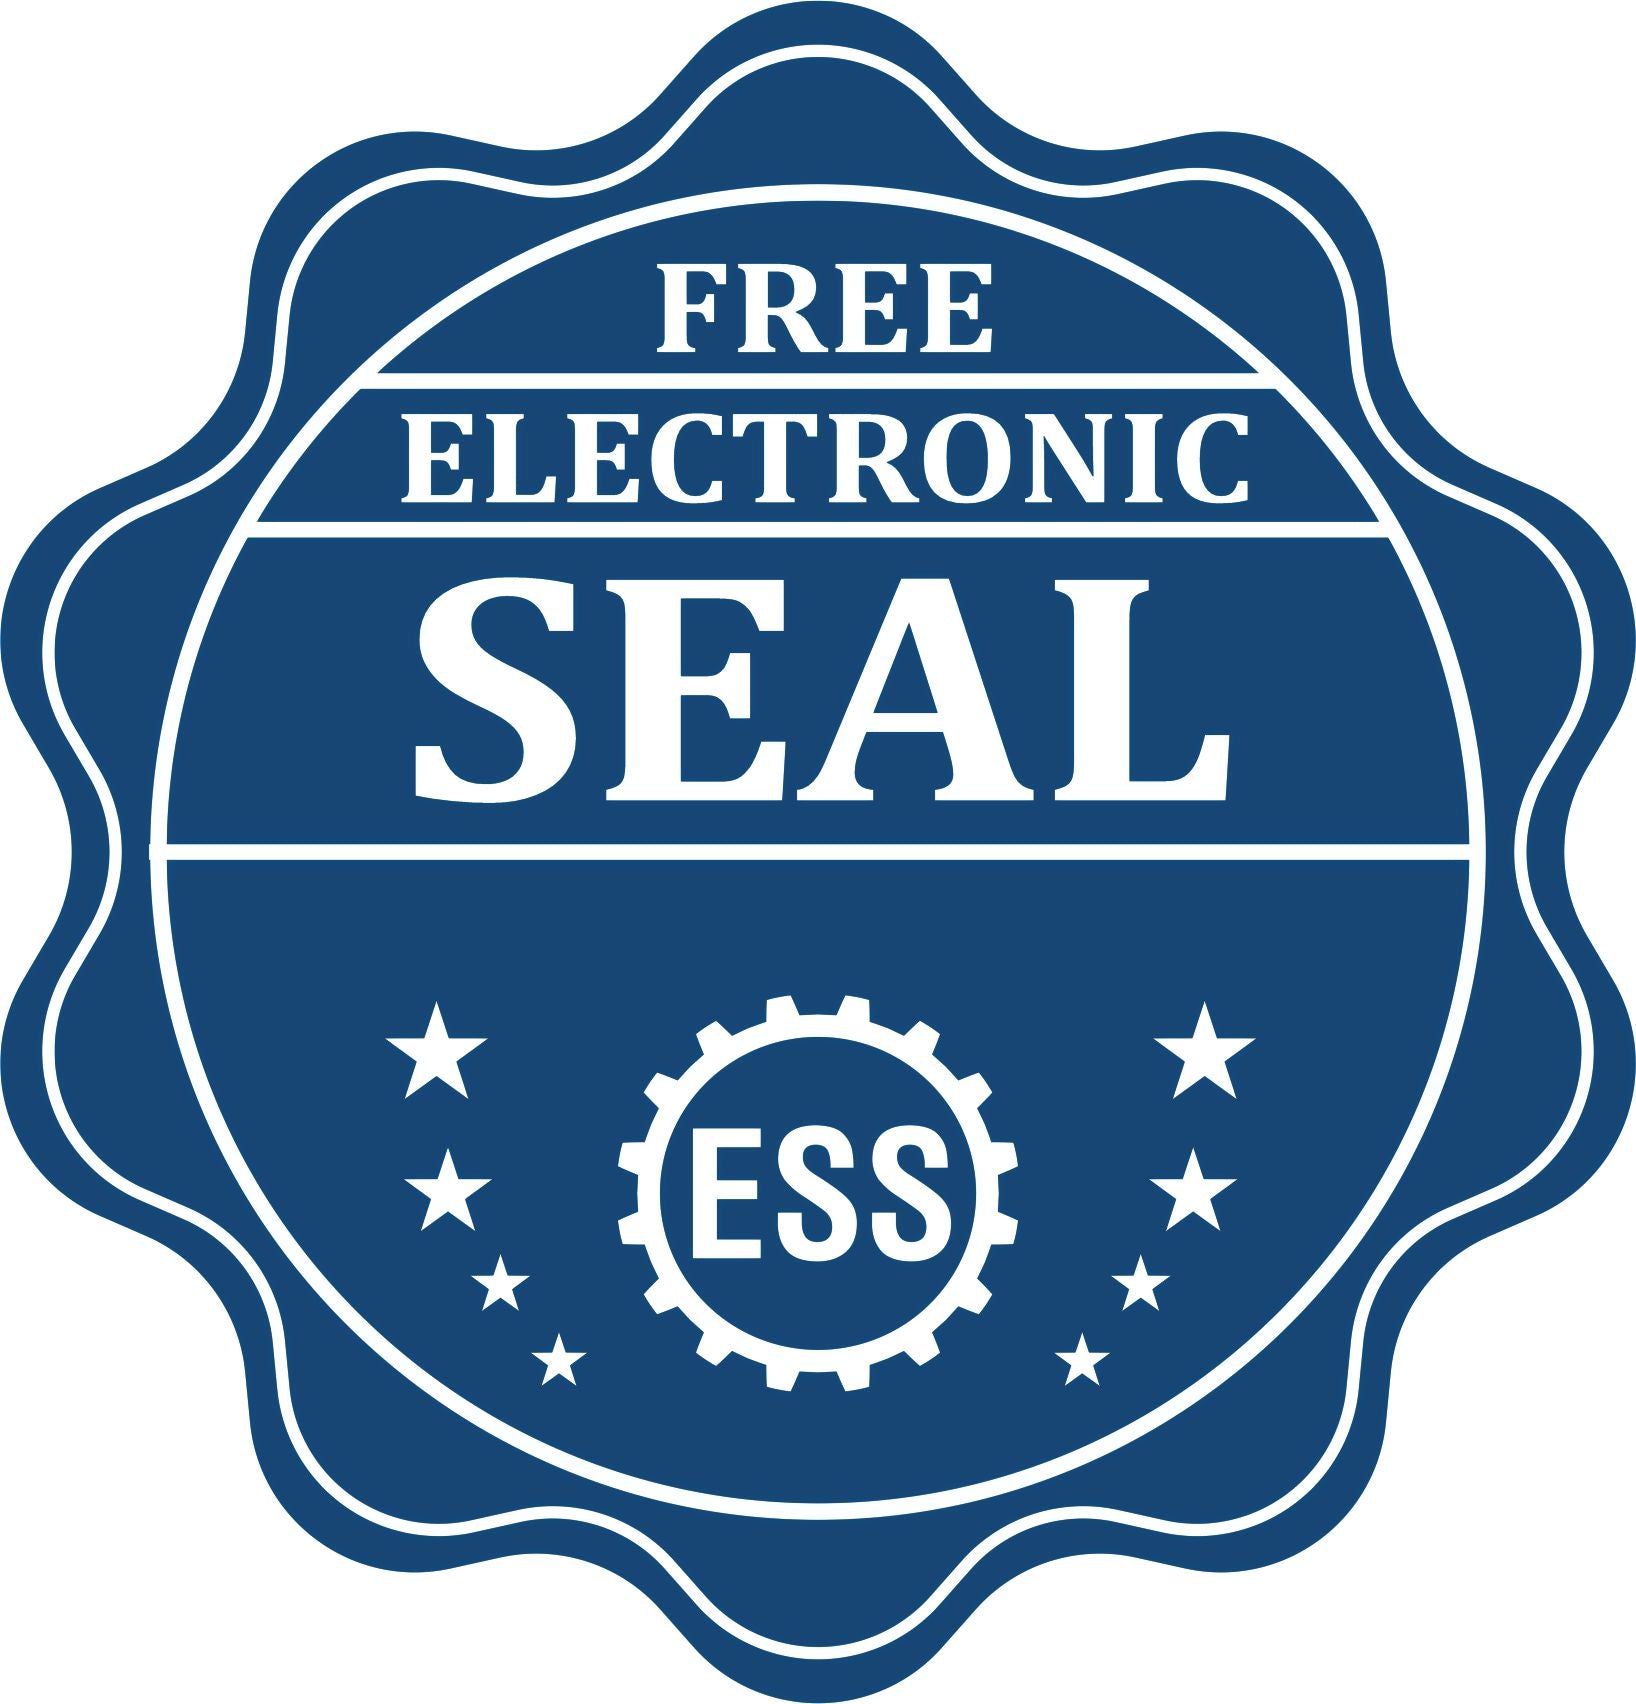 A badge showing a free electronic seal for the Slim Pre-Inked Texas Professional Geologist Seal Stamp with stars and the ESS gear on the emblem.